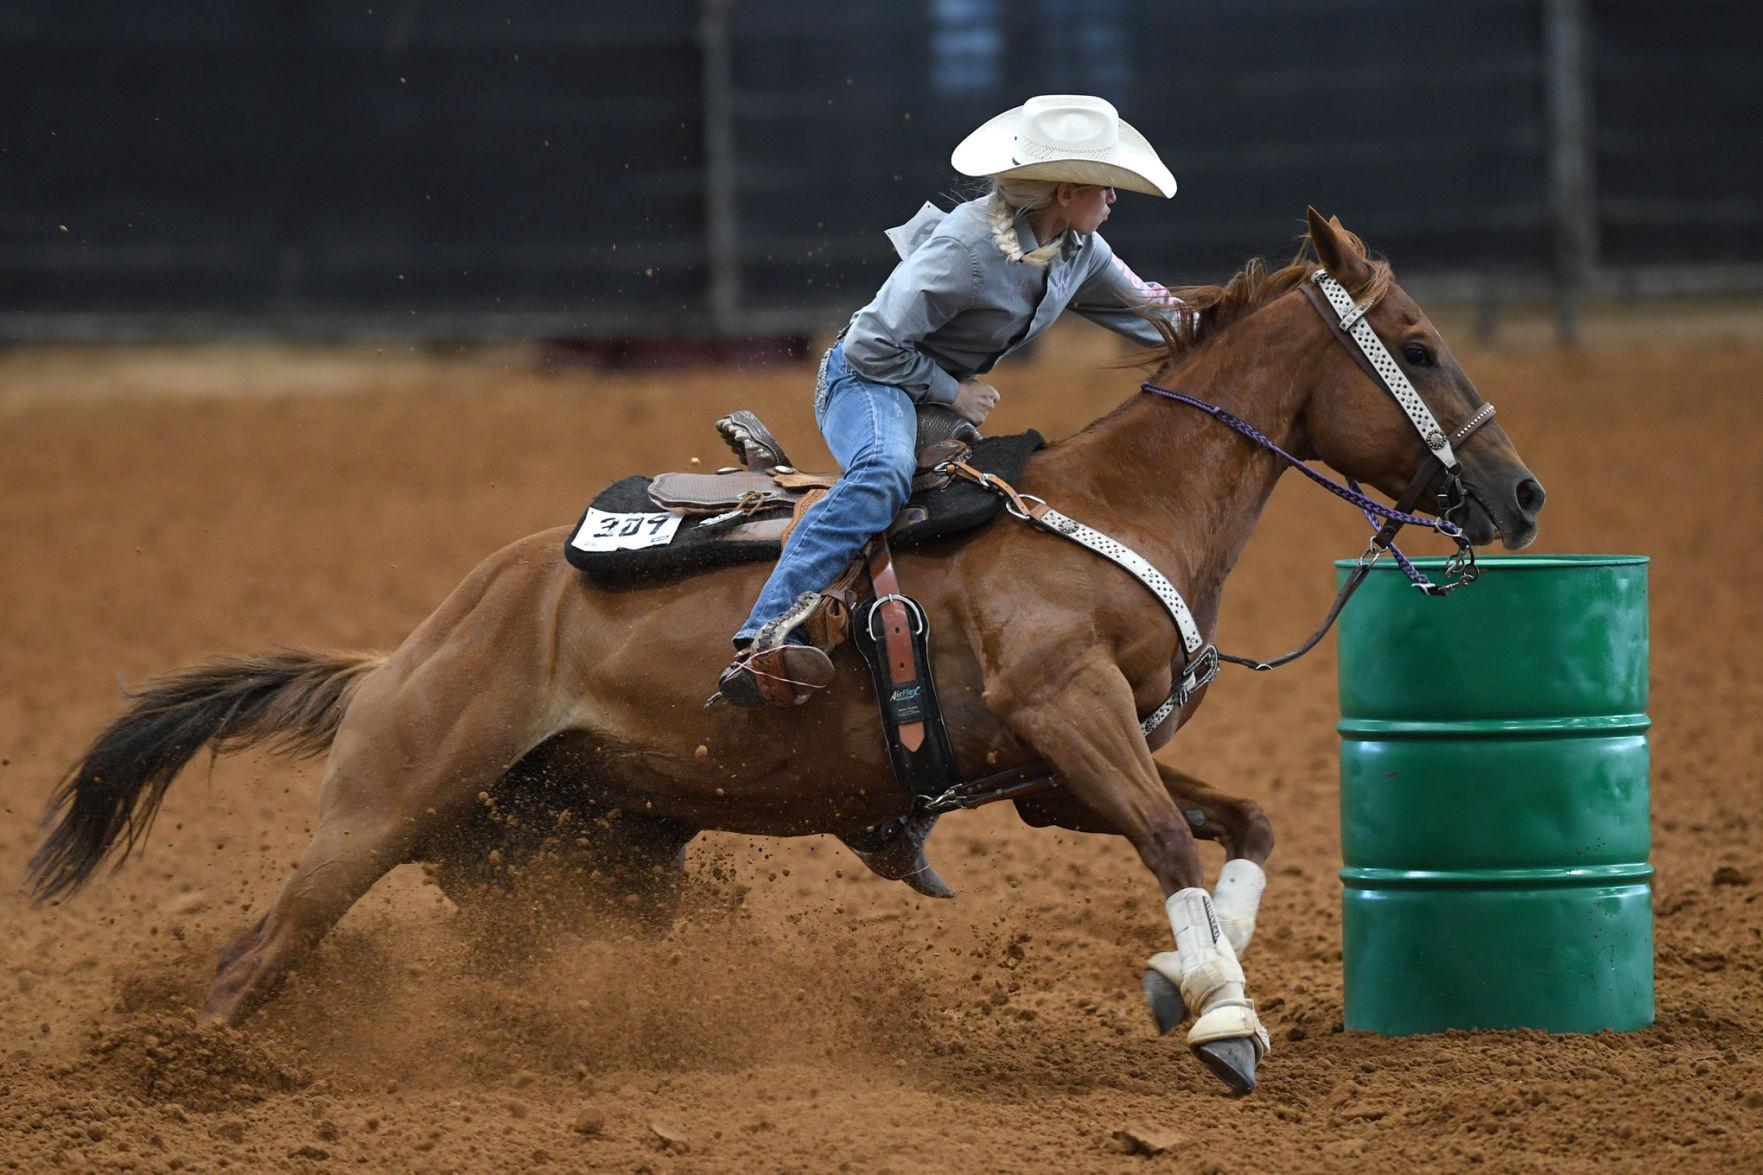 Gallery Barrel racing at the Texas State 4H Horse Show